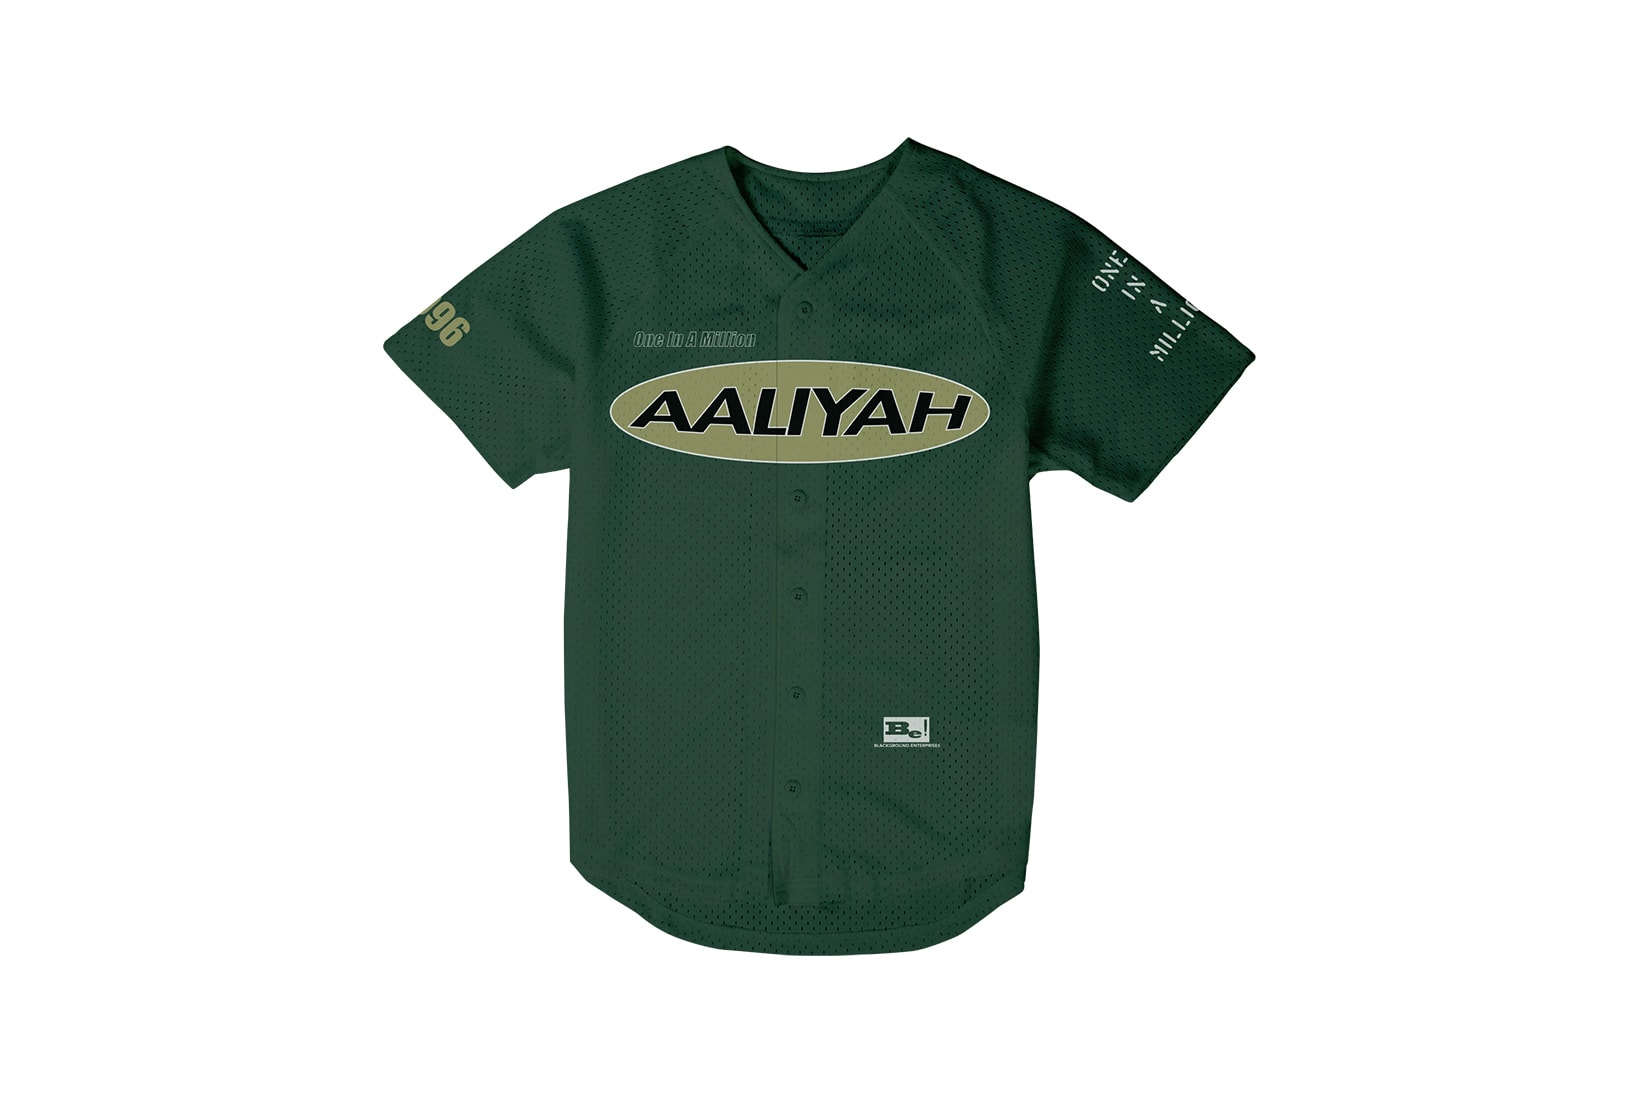 Aaliyah One In A Million Album Merch Collection Baseball jersey